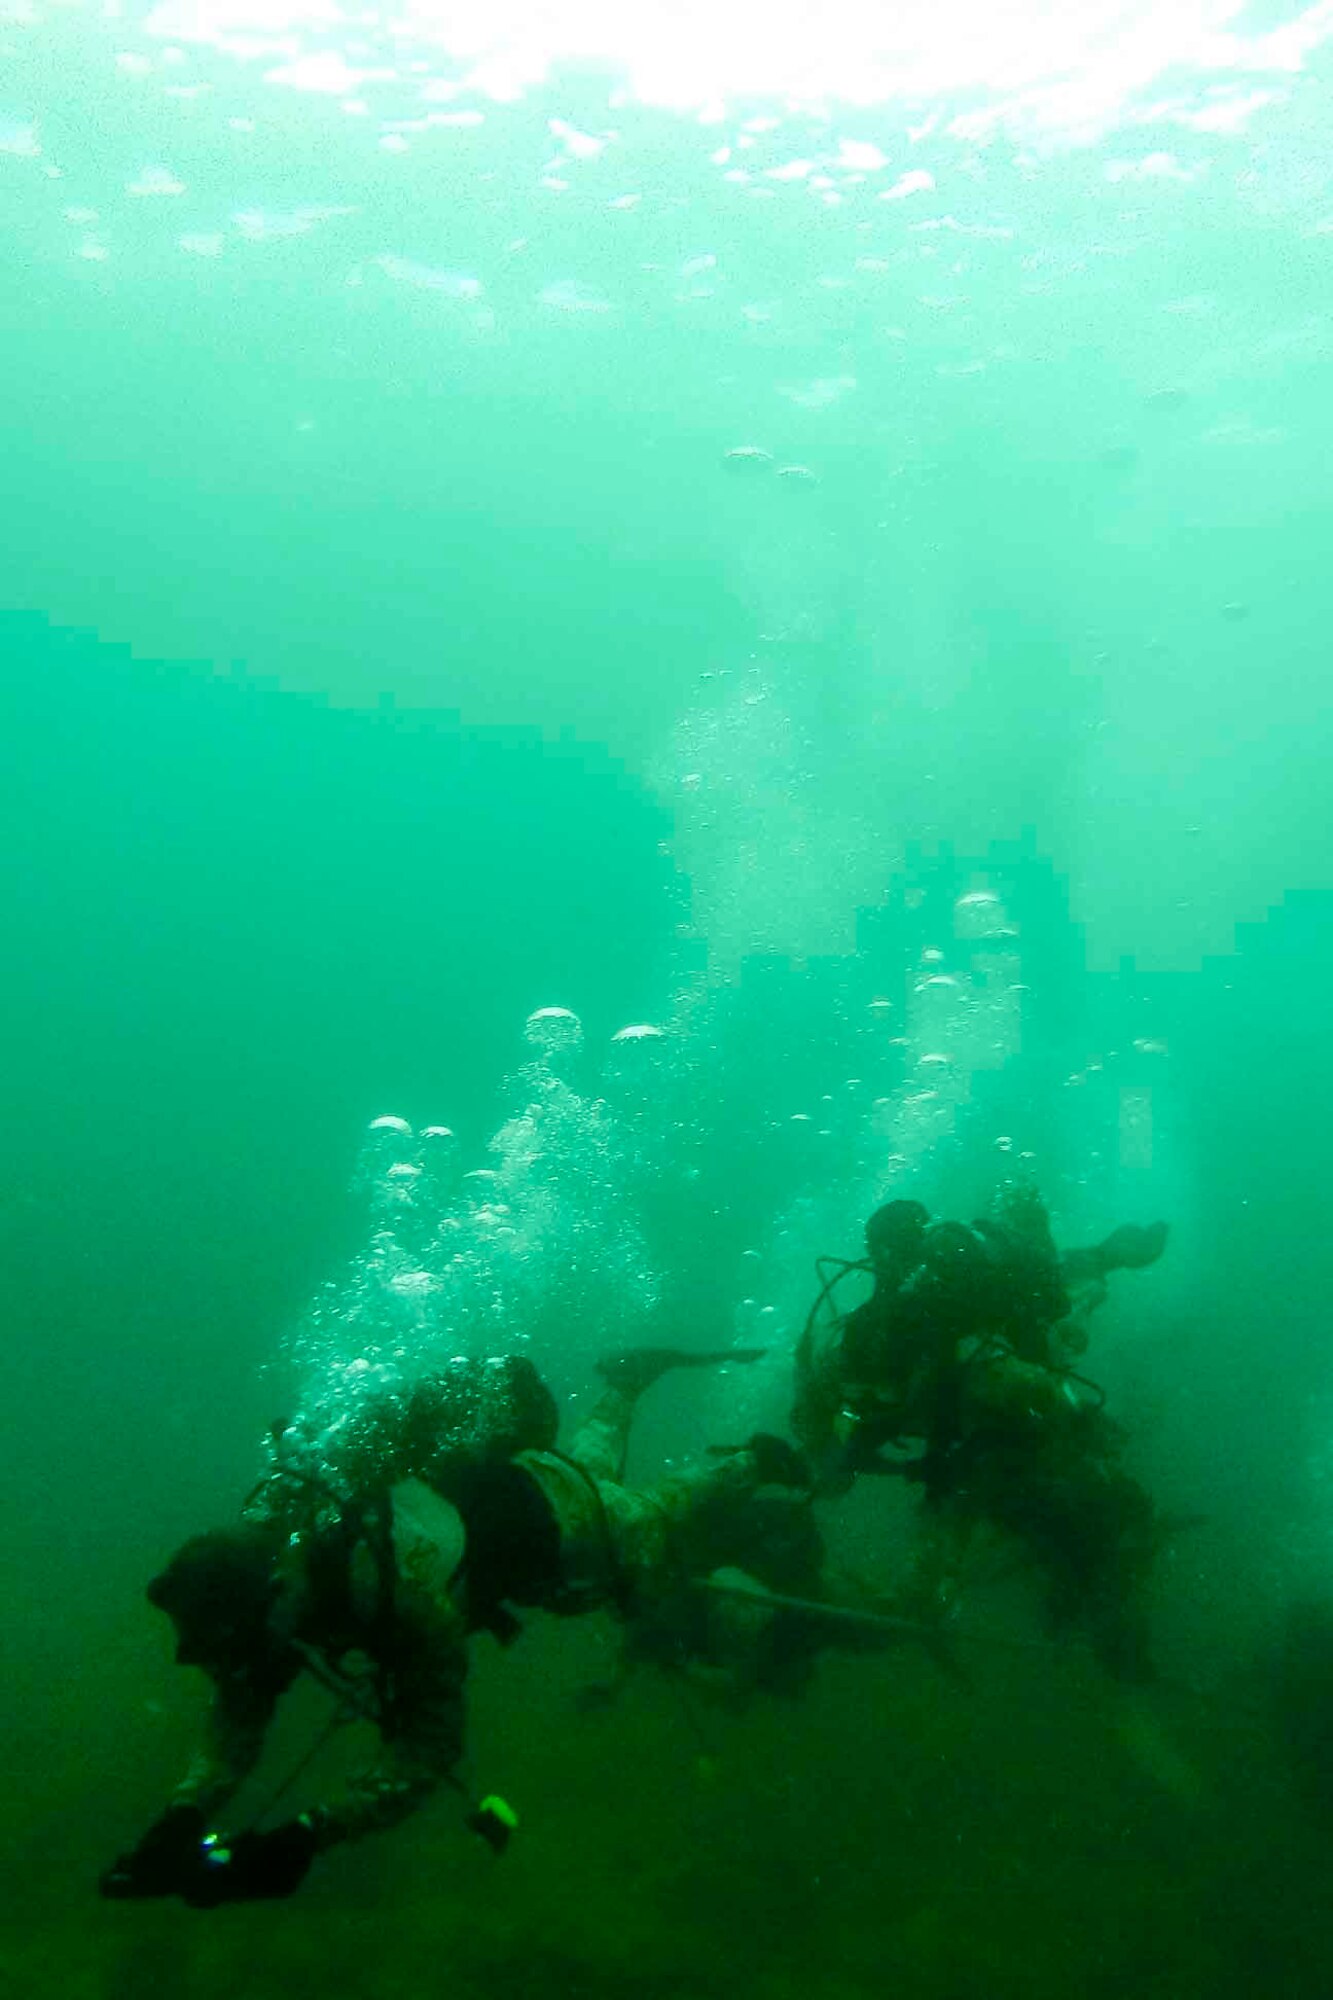 U.S. Air Force combat control Airmen from the 320th Special Tactics Squadron, Kadena Air Base, perform an open-circuit navigation dive during an amphibious operations exercise Sept. 22, 2015, off the West Coast of Okinawa, Japan. Special tactics team Airmen are organized, trained and equipped to conduct special operations core tasks during high-risk combat operations. (Courtesy photo)